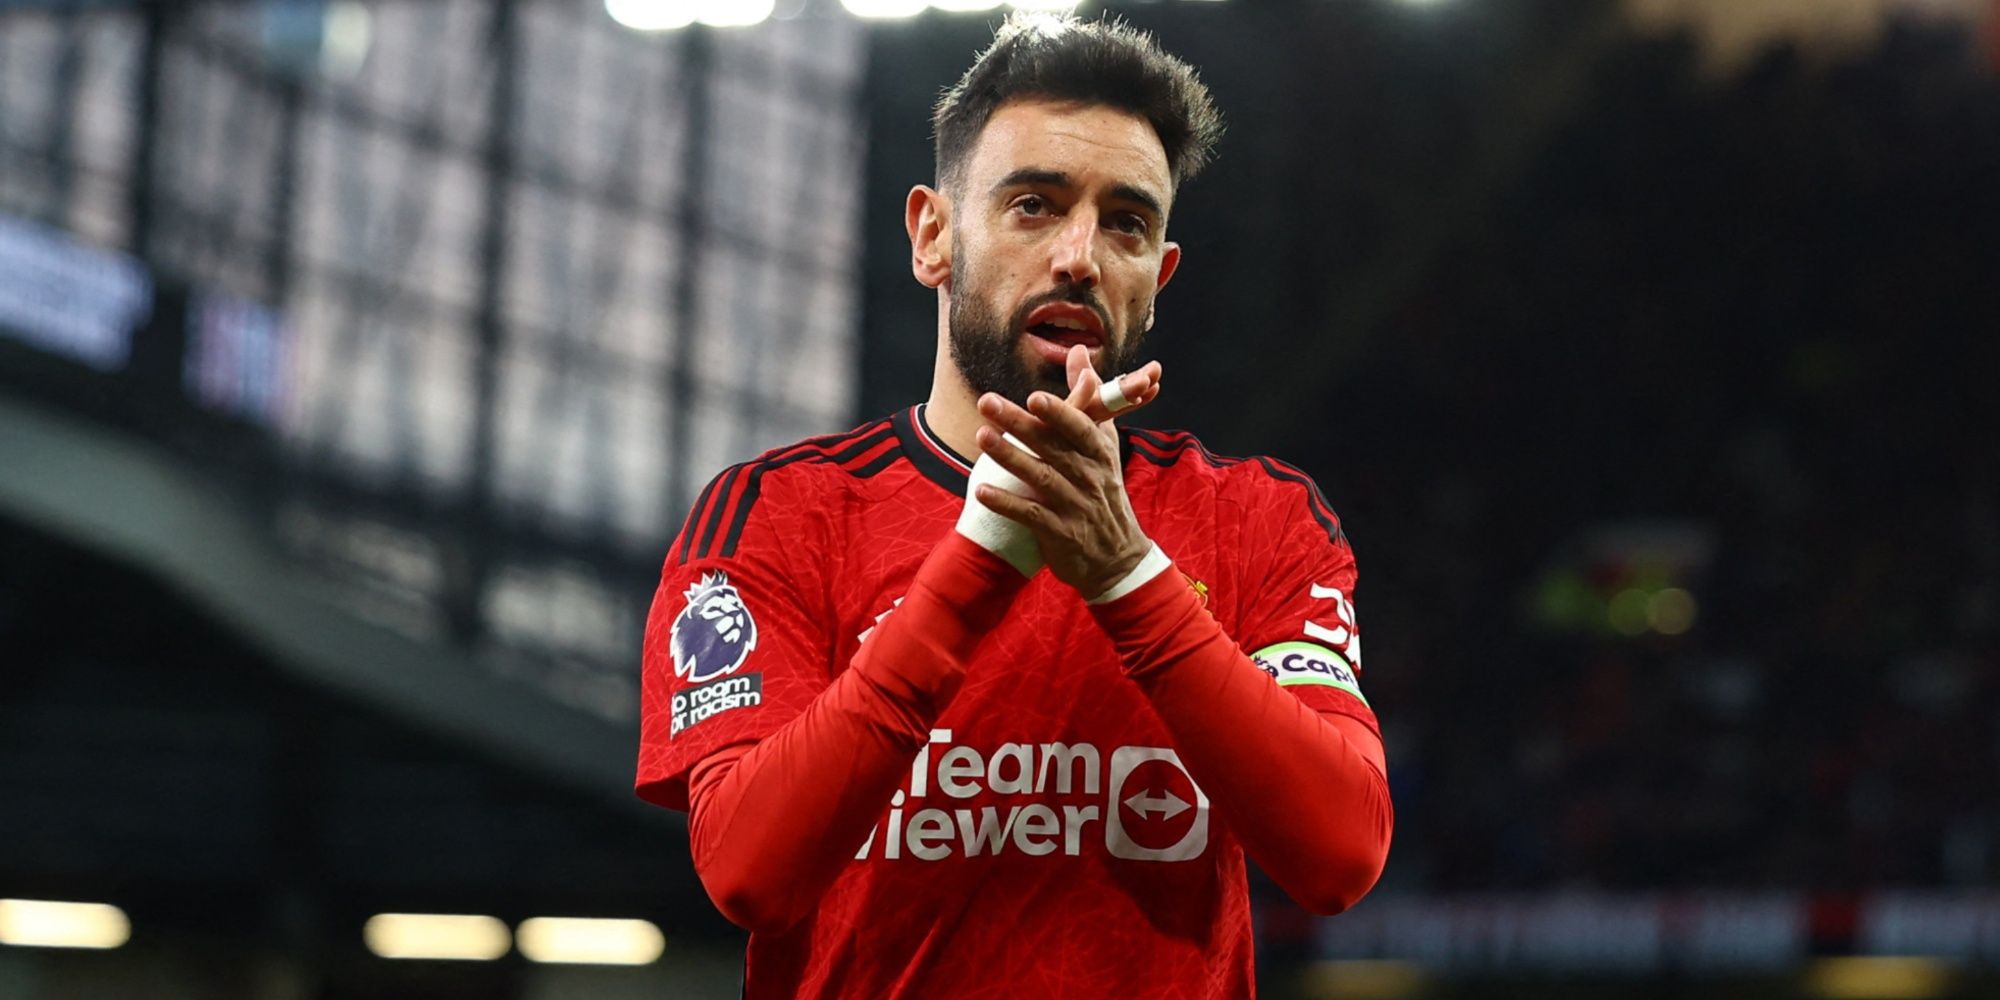 "The only way I will leave Man United" -- Bruno Fernandes